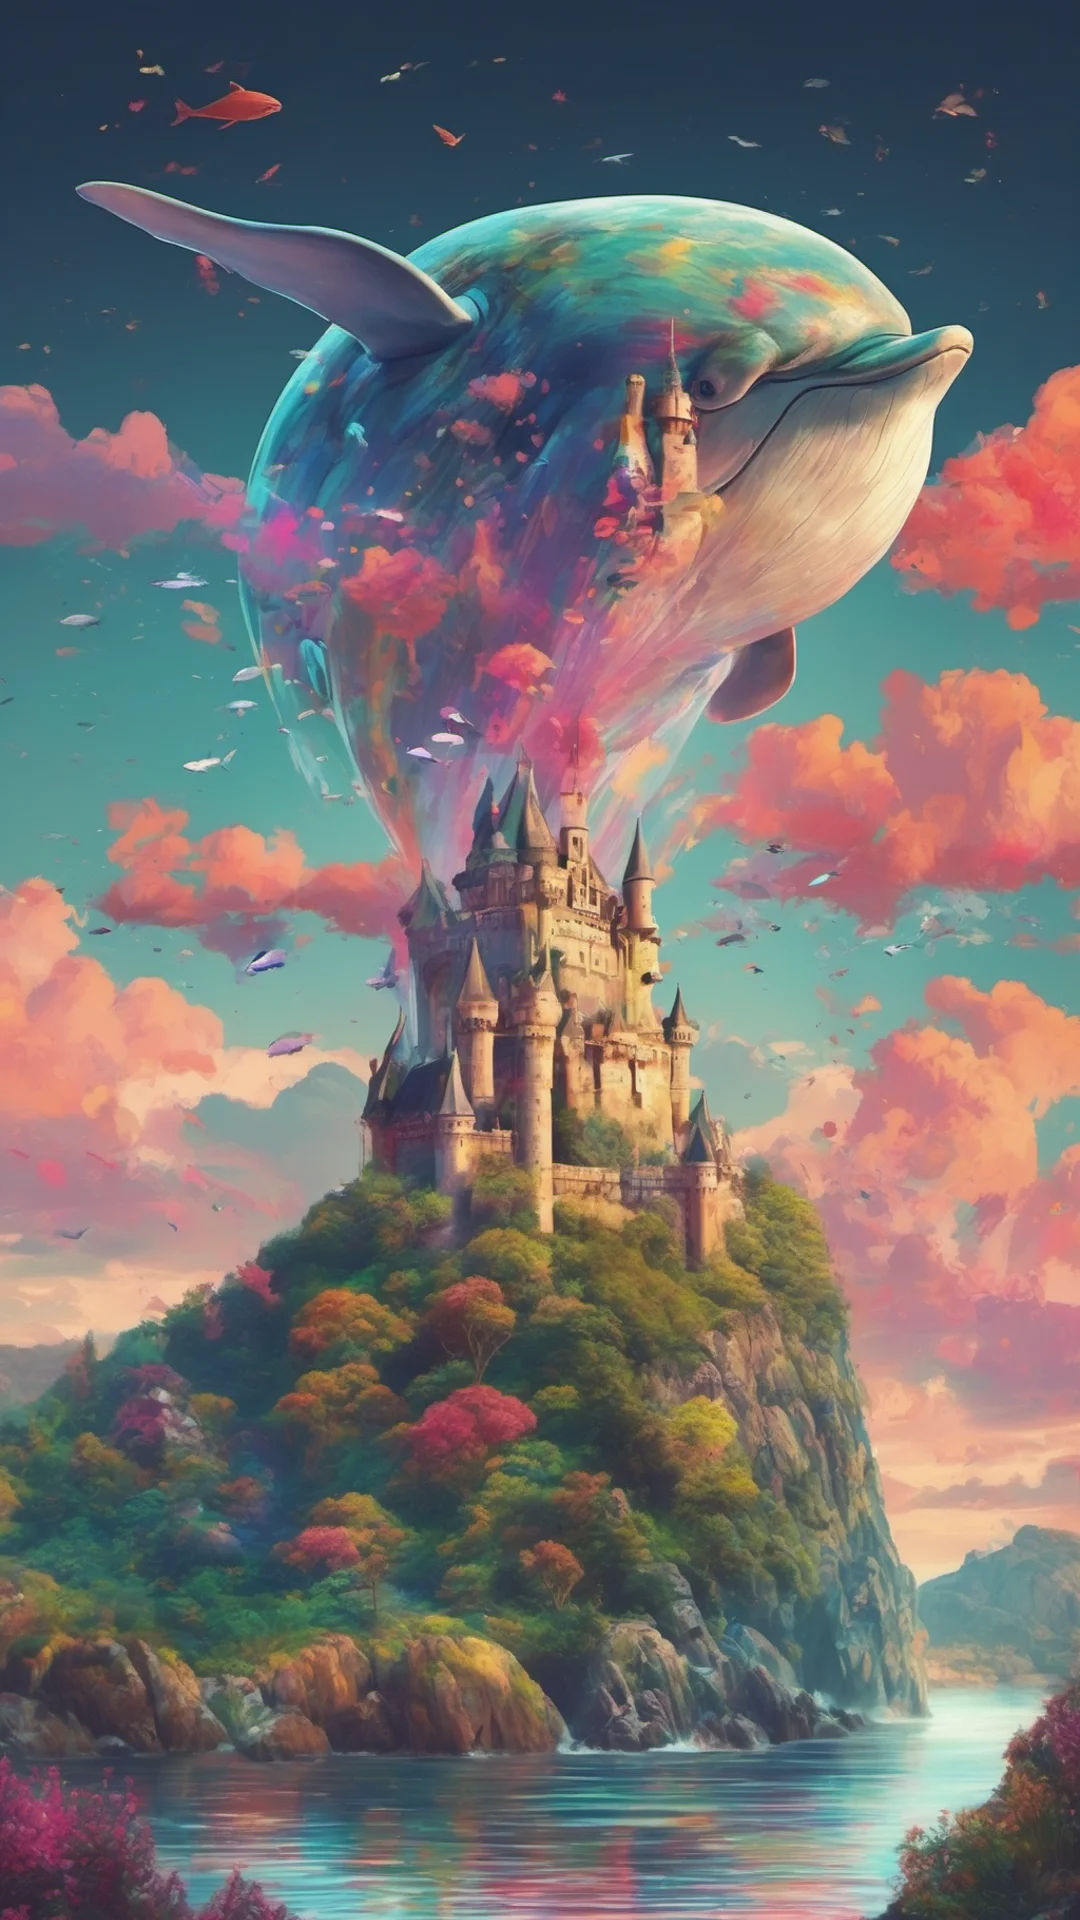 picturesque landscape  beautiful colorful tones bay of islands grace stunning castle flying whale with colorful planet rising amazing awesome portrait 2 tall